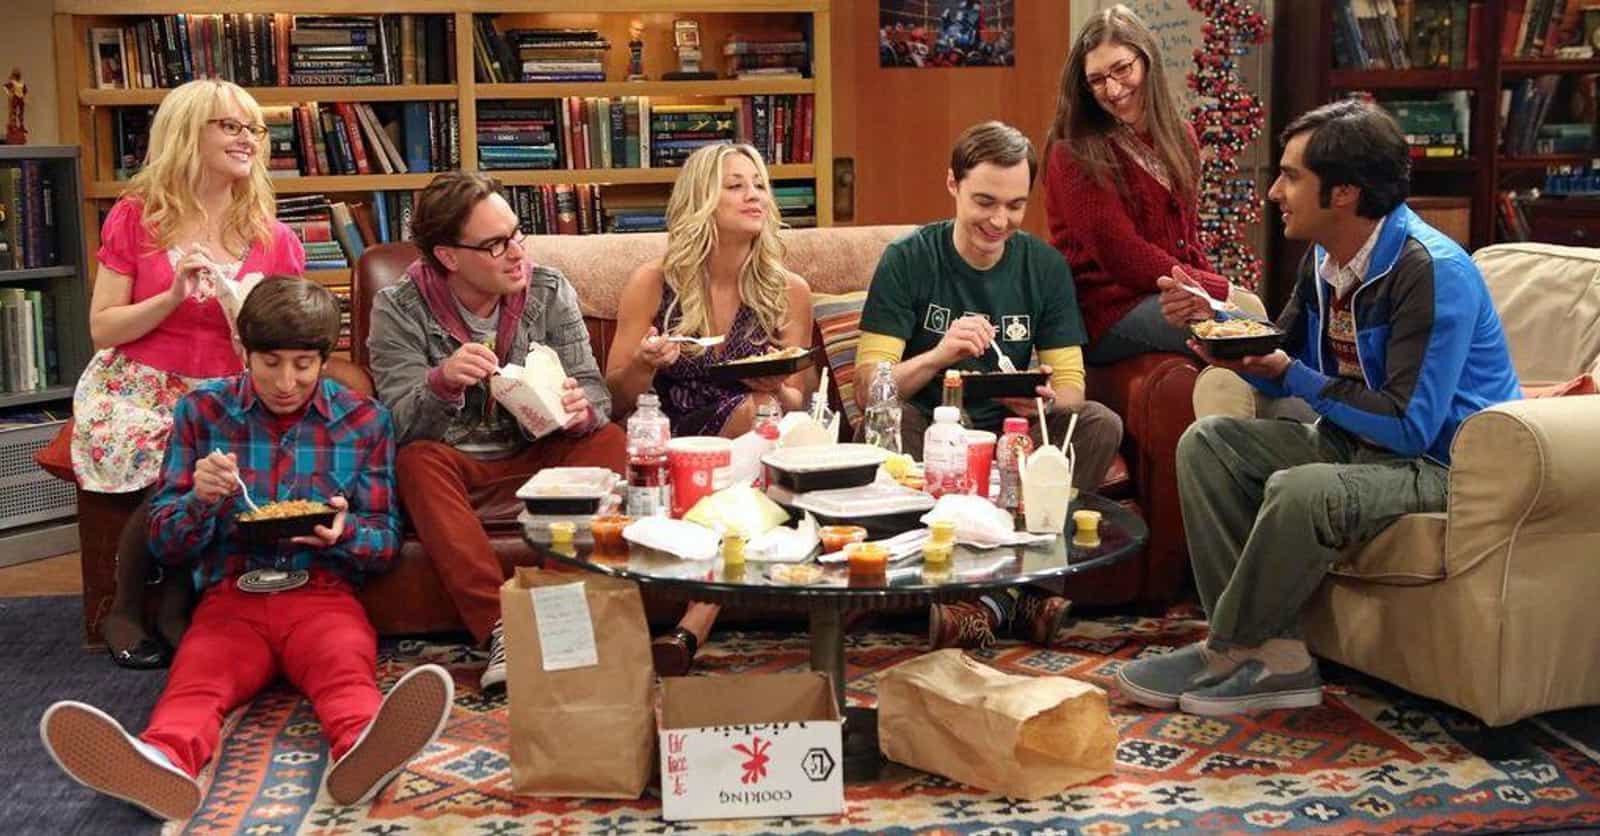 Behind-The-Scenes Secrets From The Set Of 'The Big Bang Theory'